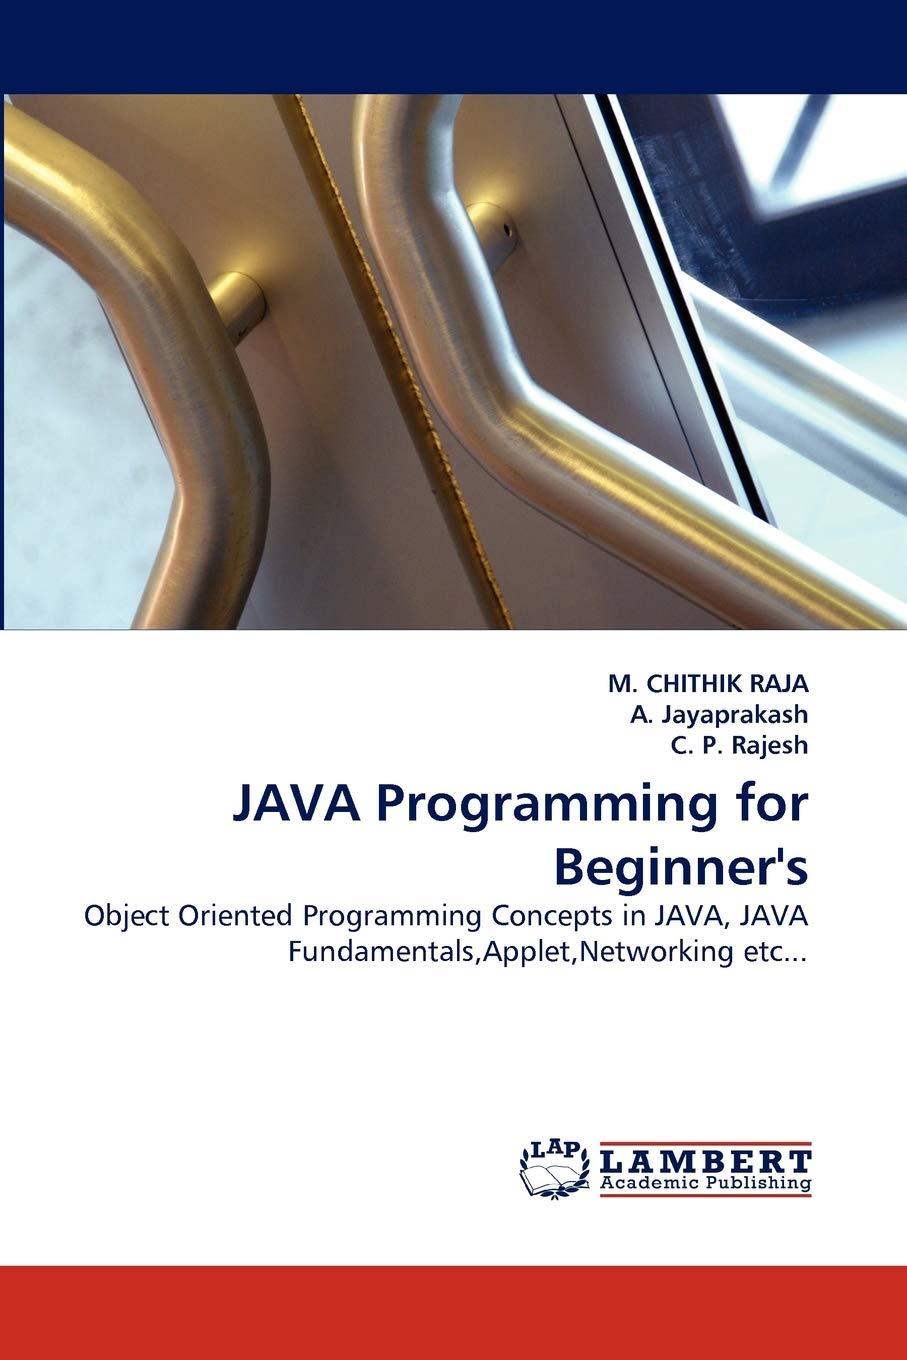 java programming for beginners object oriented programming concepts in java fundamentals applet networking